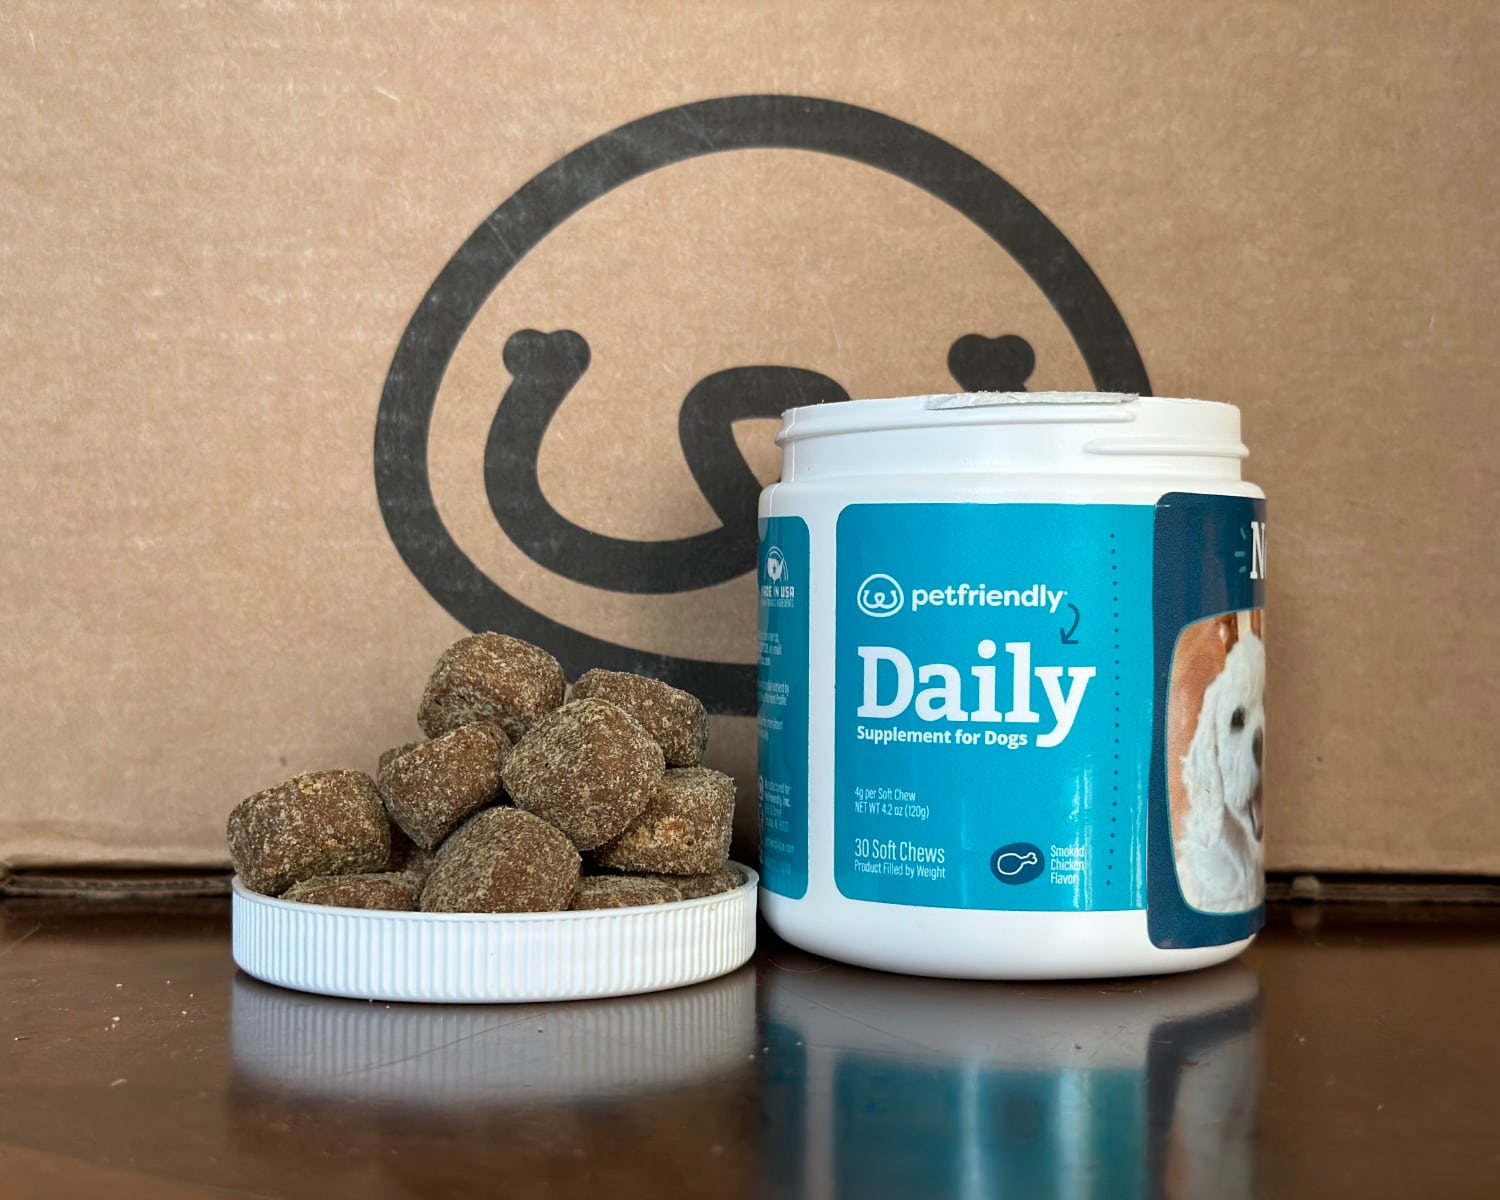 PetFriendly - daily supplement for dogs